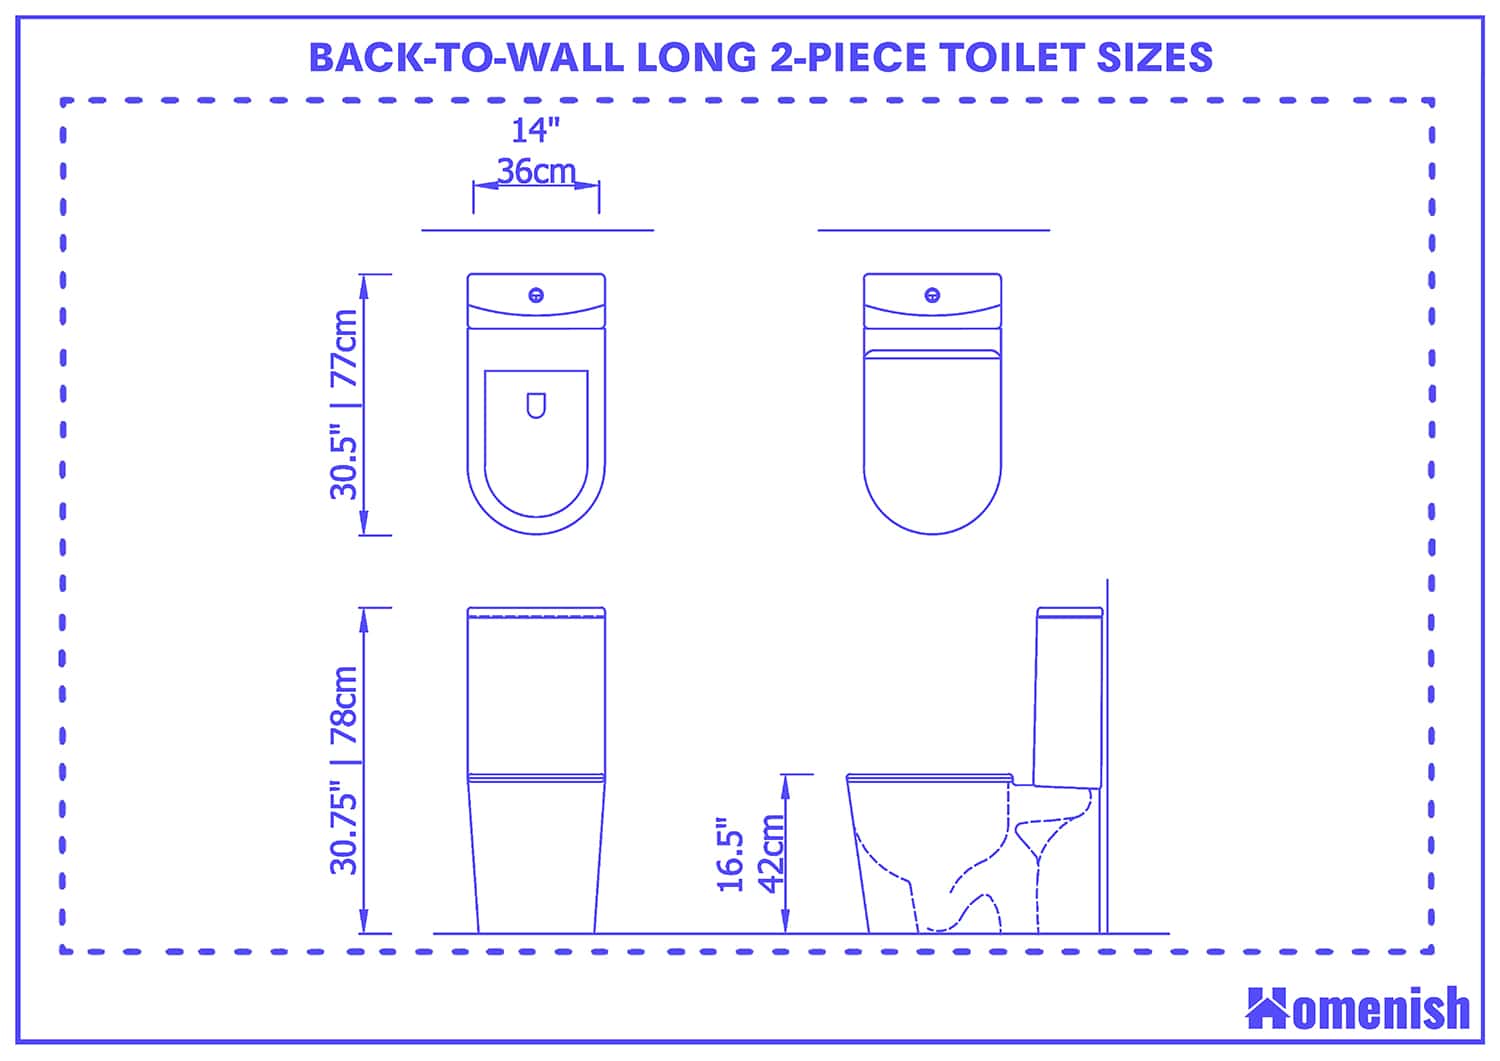 Back to wall long 2 piece toilet sizes